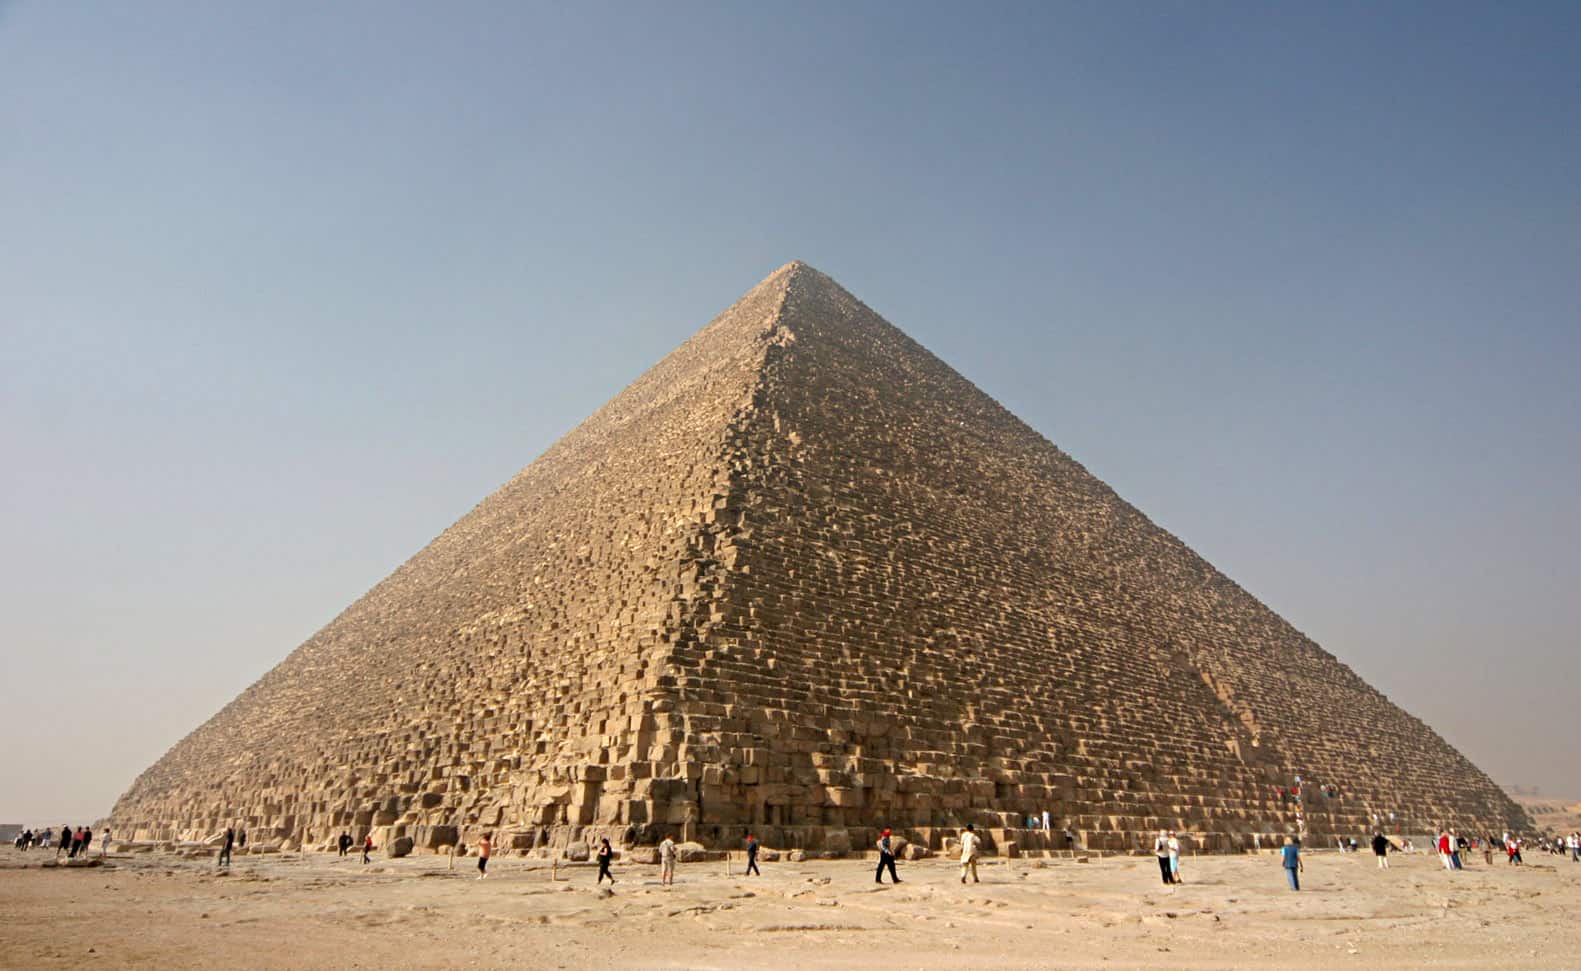 National monument of Egypt - Great Pyramid of Giza